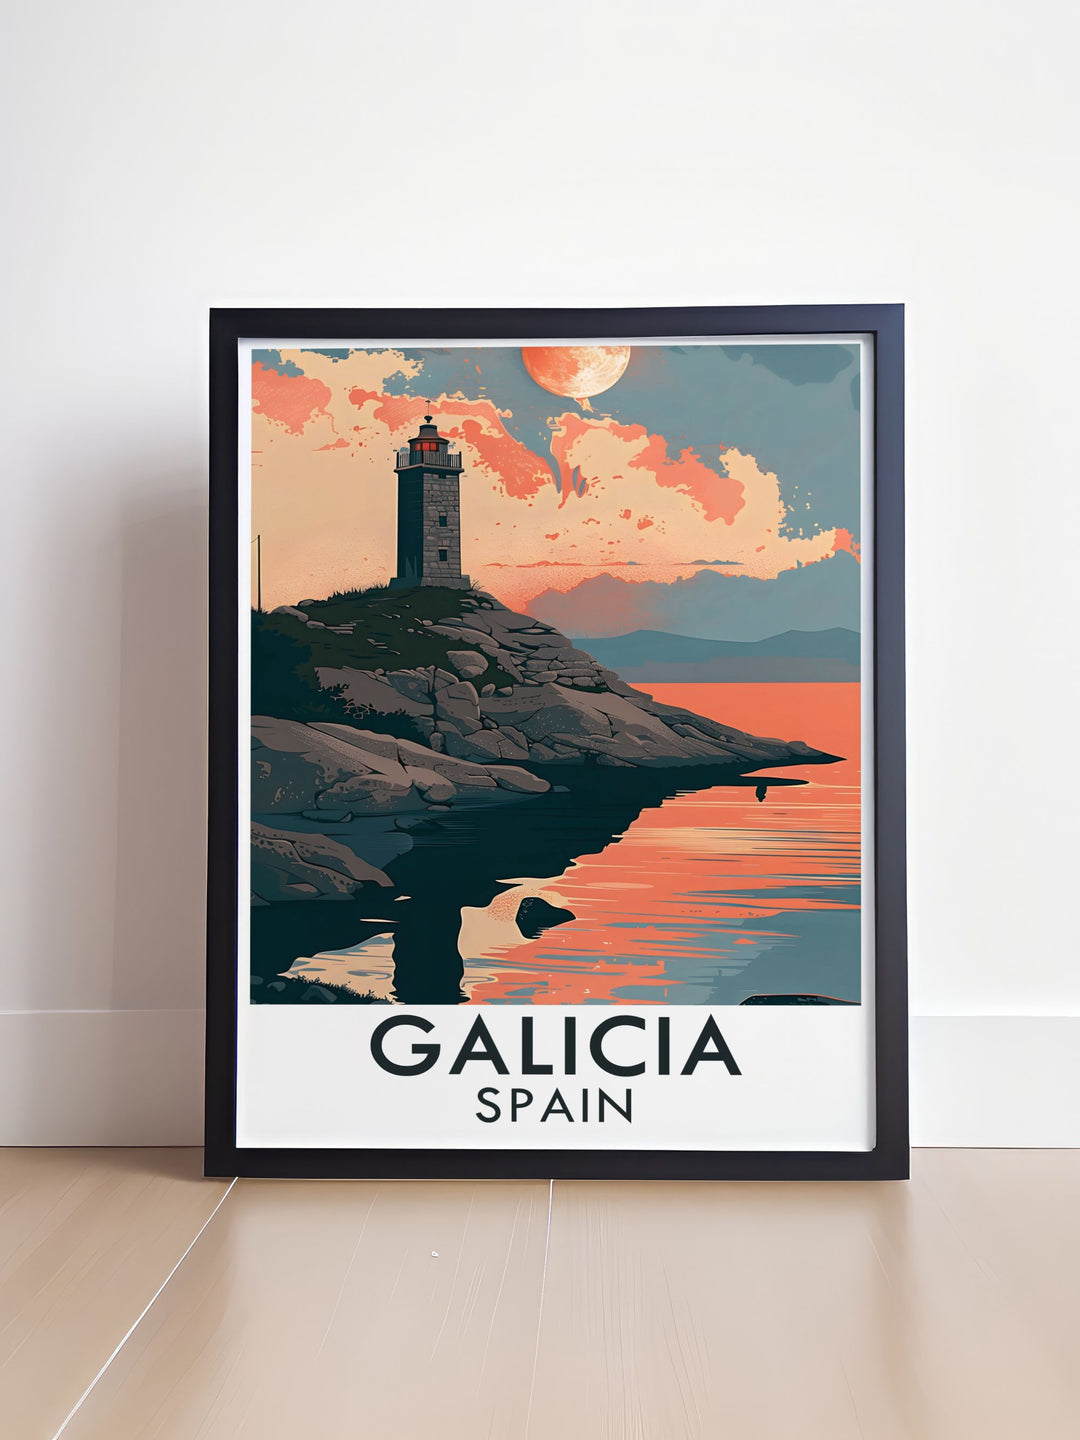 Featuring the stunning panoramic views from the Tower of Hercules observation deck, this artwork invites exploration.